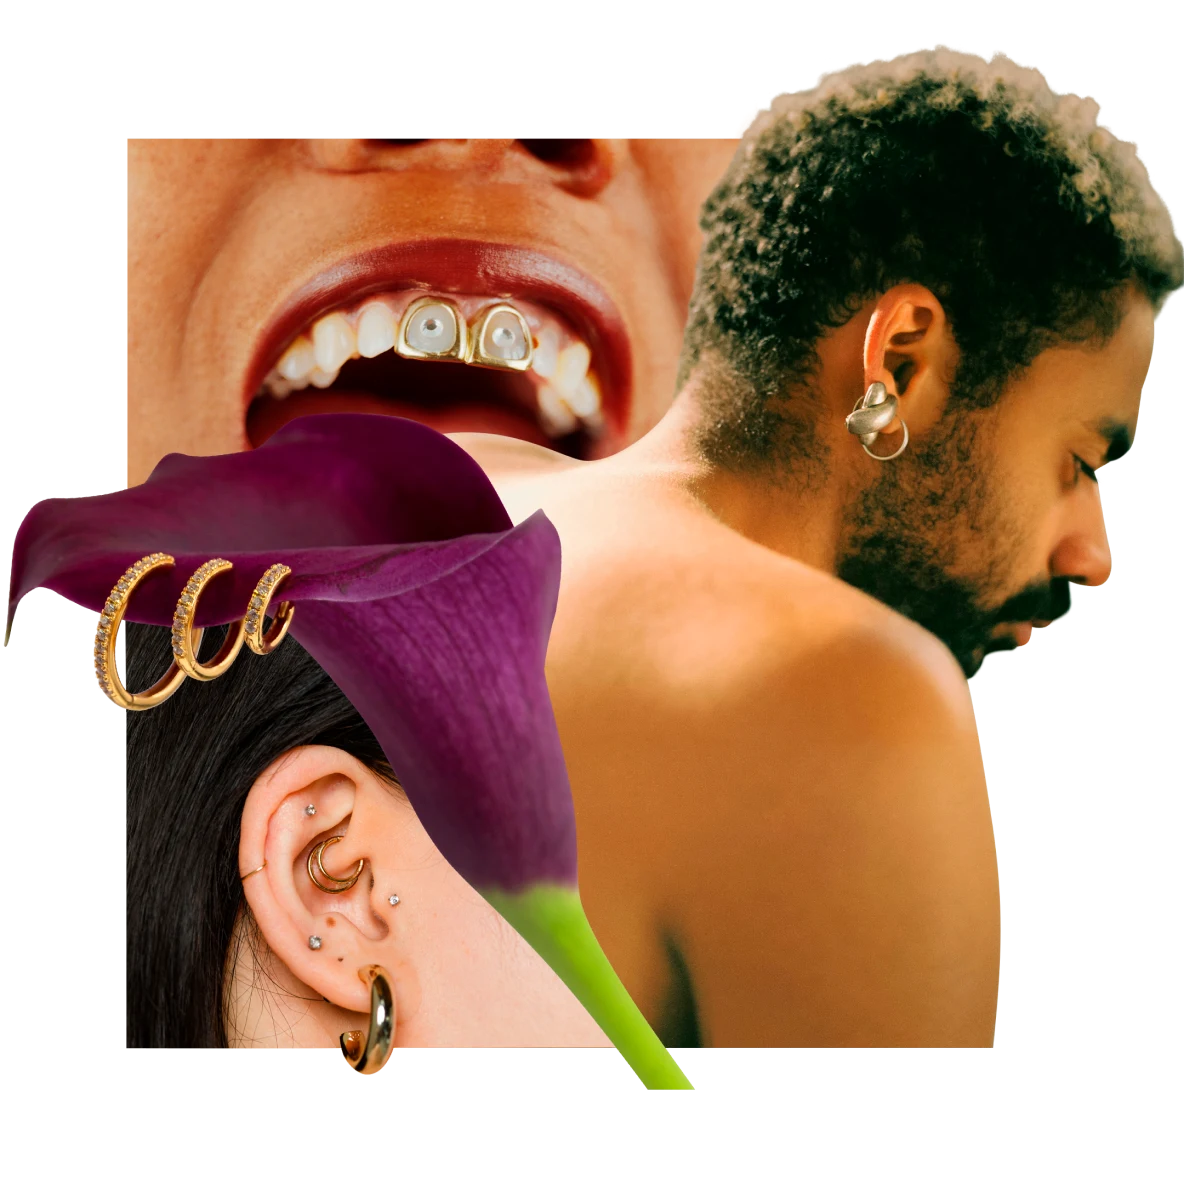 Shirtless Black man with large silver earring. Purple calla lily with three gold rings attached to the petal. Open mouth with two front gold teeth. Woman’s ear with silver studs and gold hoops.